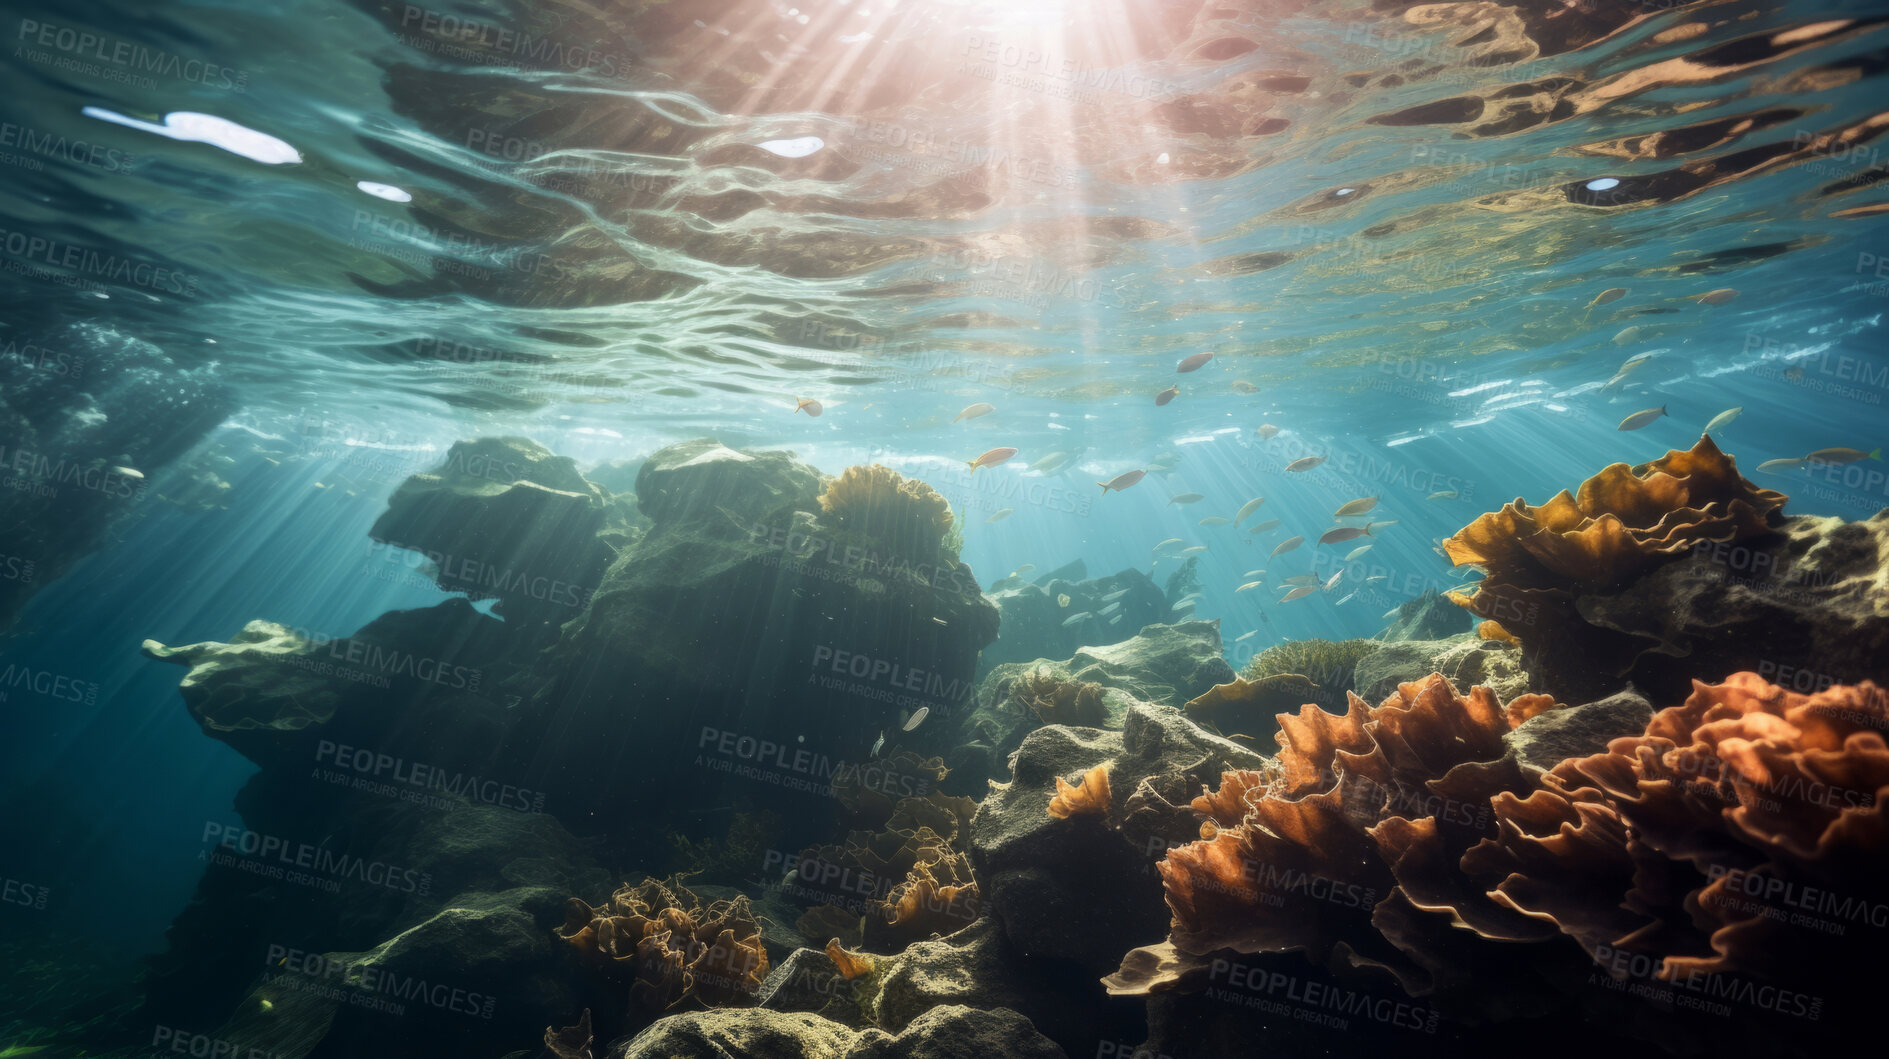 Buy stock photo Underwater scenery, various types of fish in distance. Illuminated coral reefs.